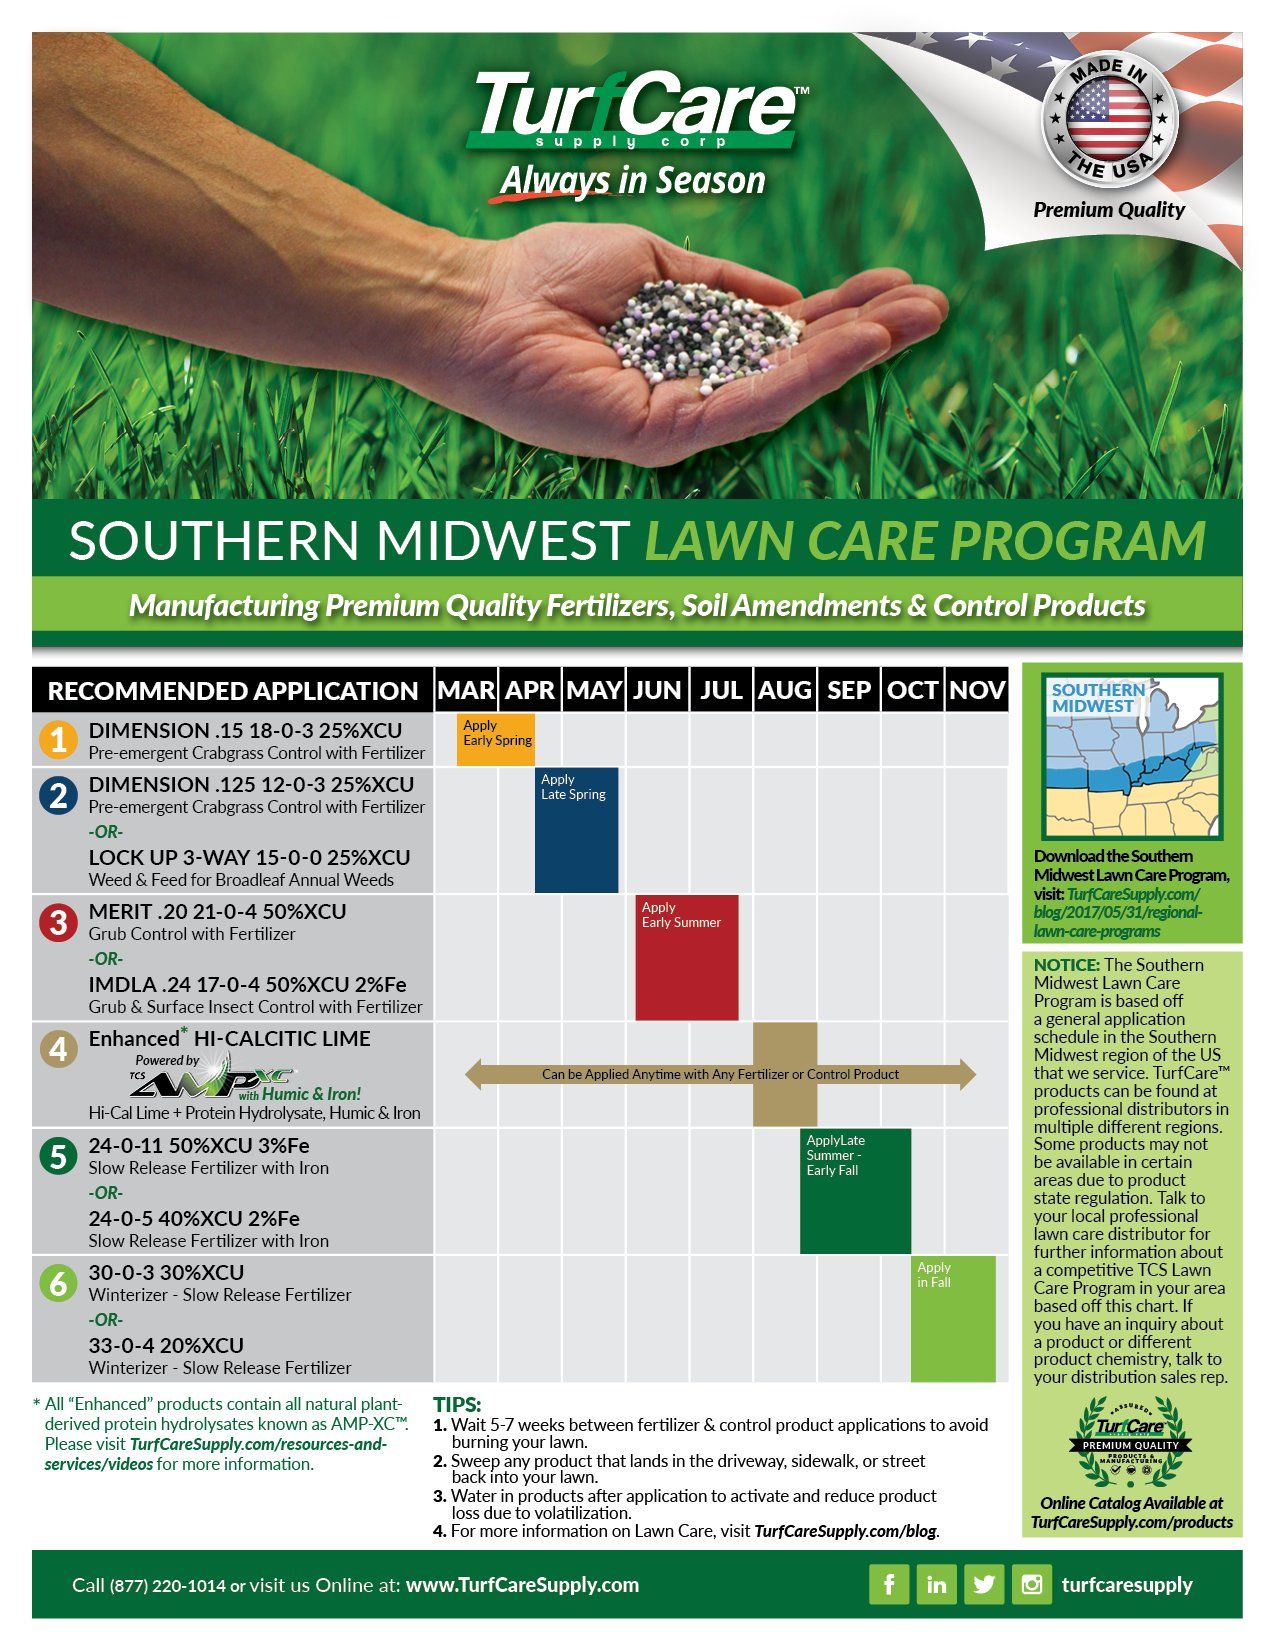 southern midwest lawn care program